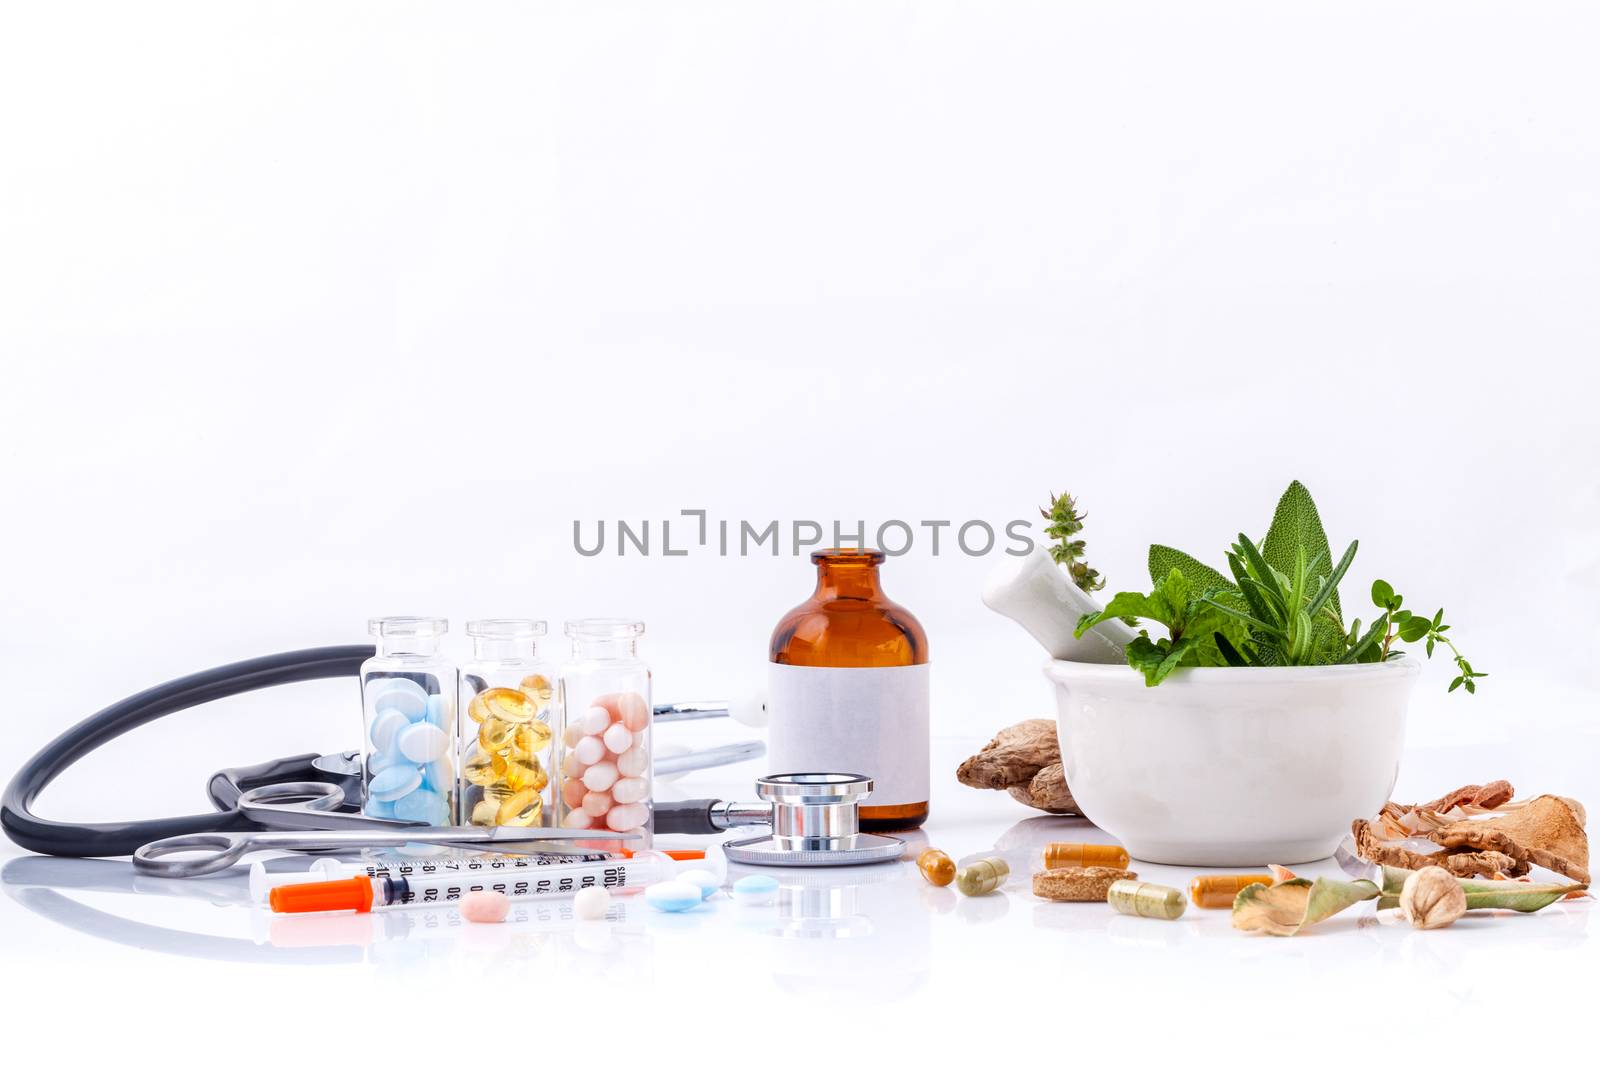 Herbal medicine VS Chemical medicine the alternative healthy care with stethoscope isolate on white background.